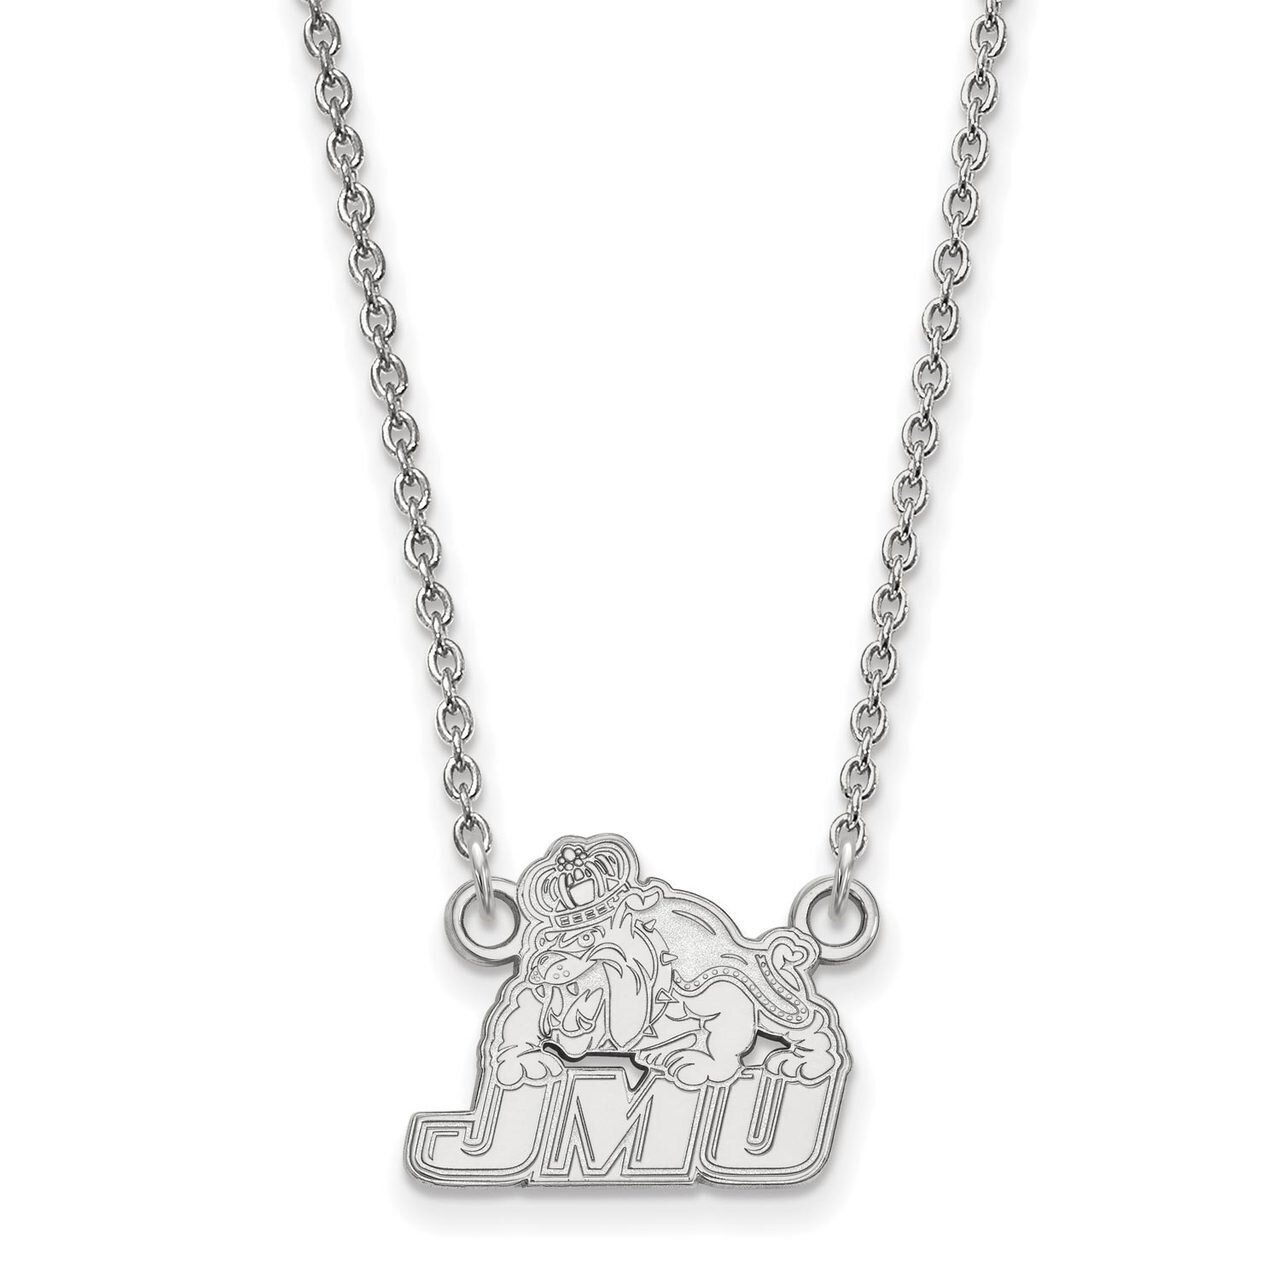 James Madison University Small Pendant with Chain Necklace 10k White Gold 1W005JMU-18